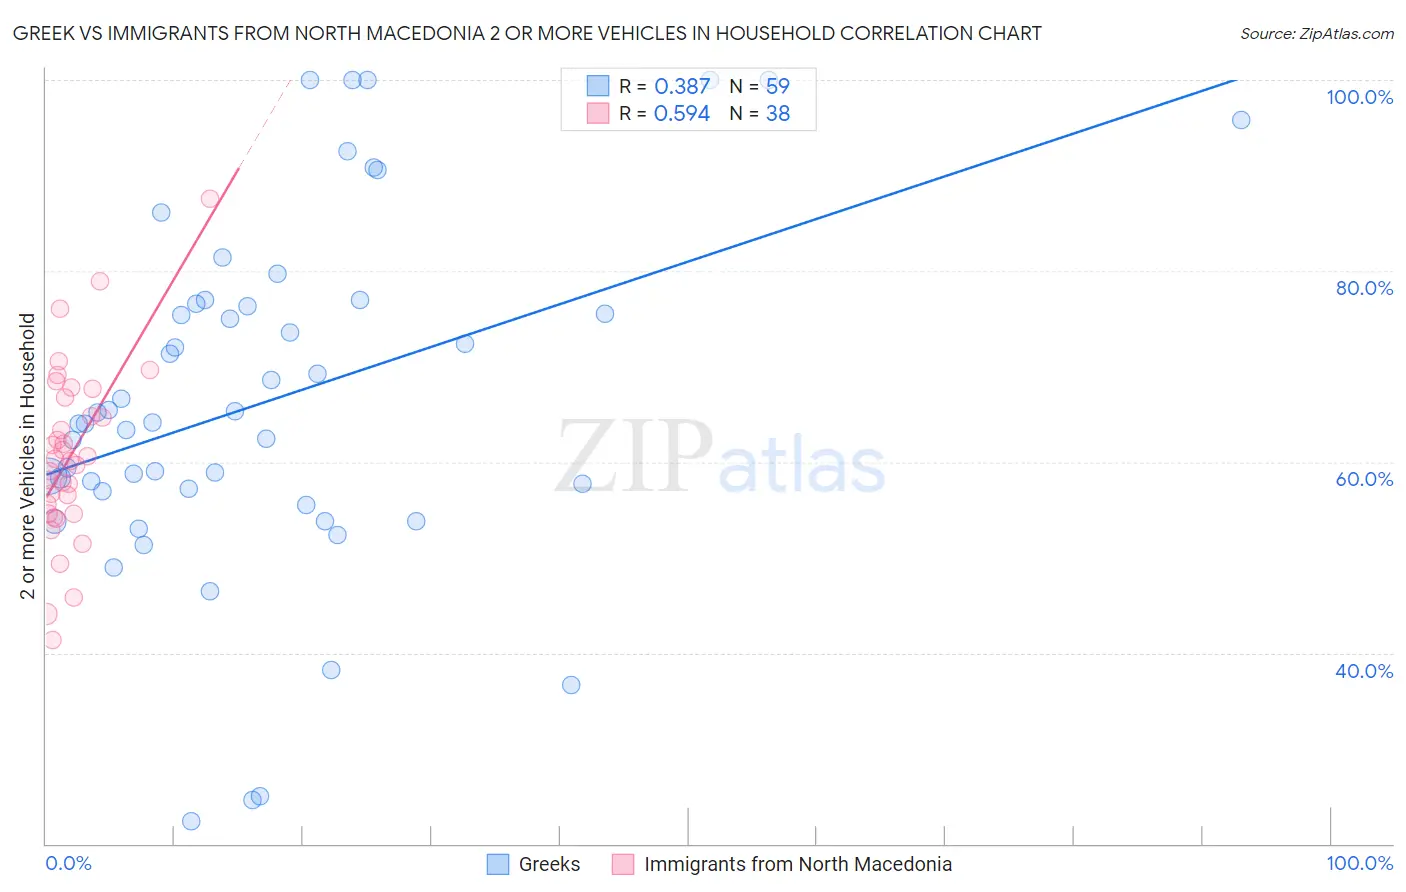 Greek vs Immigrants from North Macedonia 2 or more Vehicles in Household